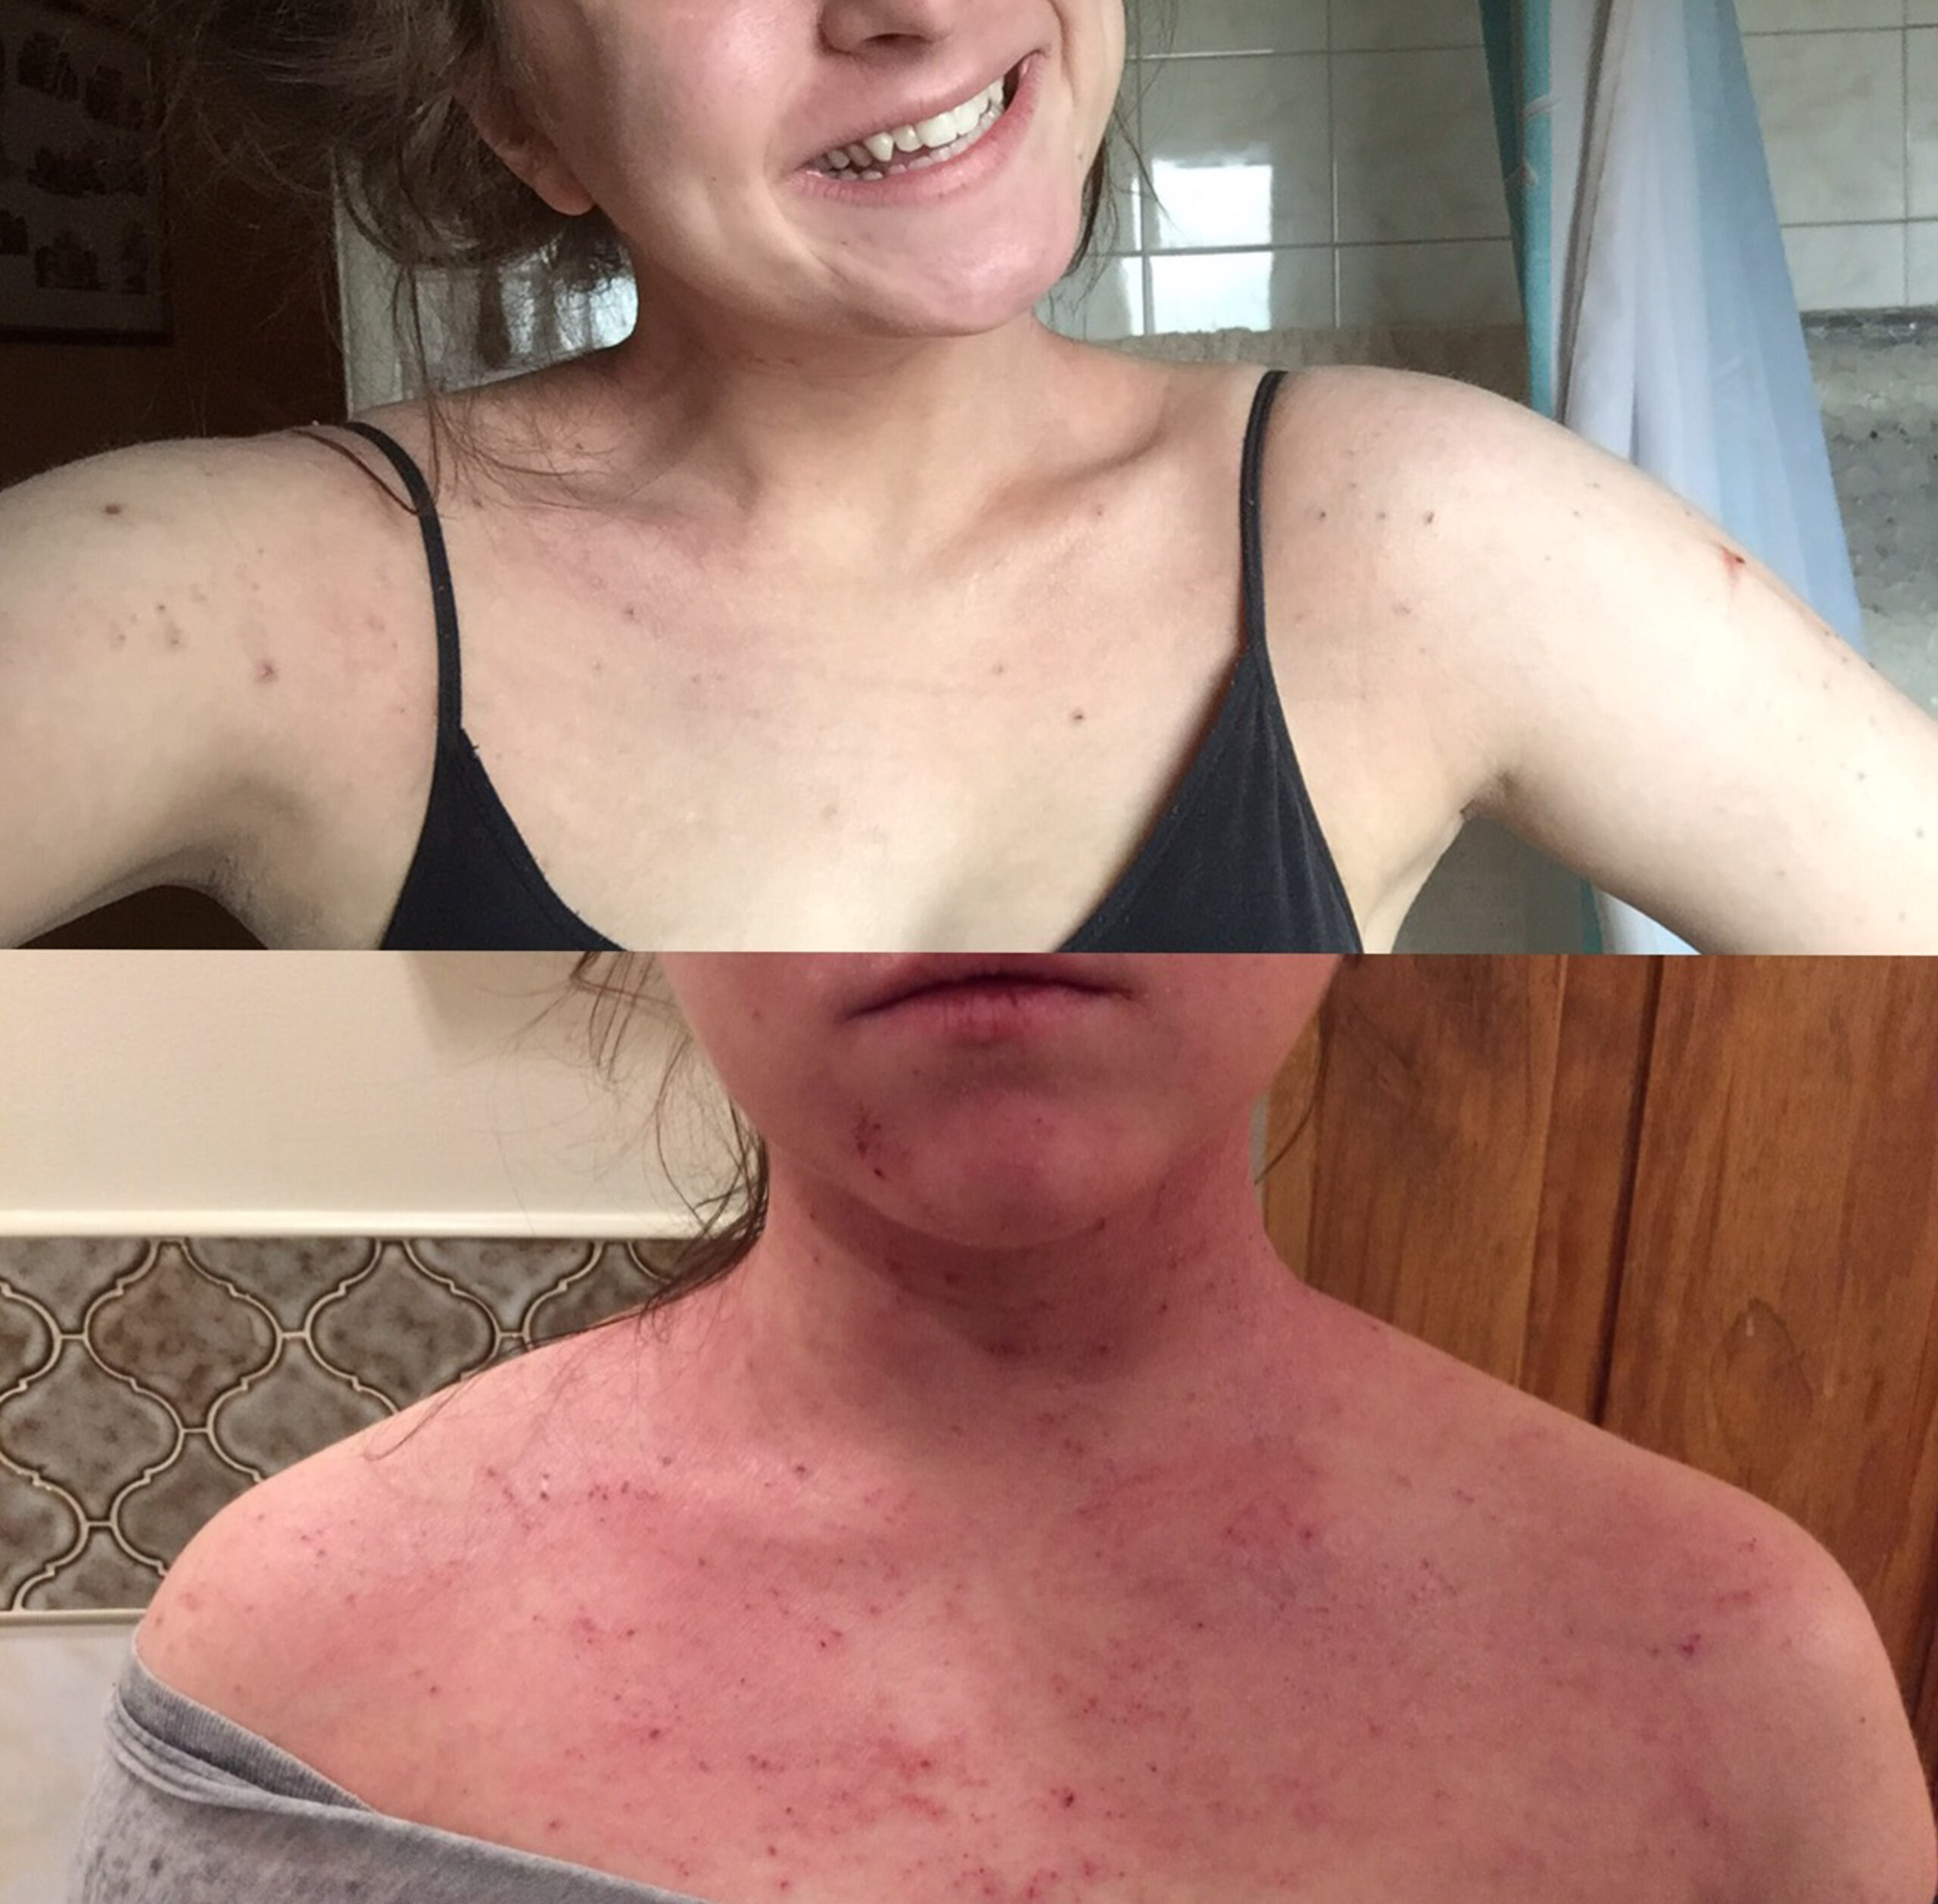 Woman, 22, credits bizarre Aussie product for curing her crippling eczema